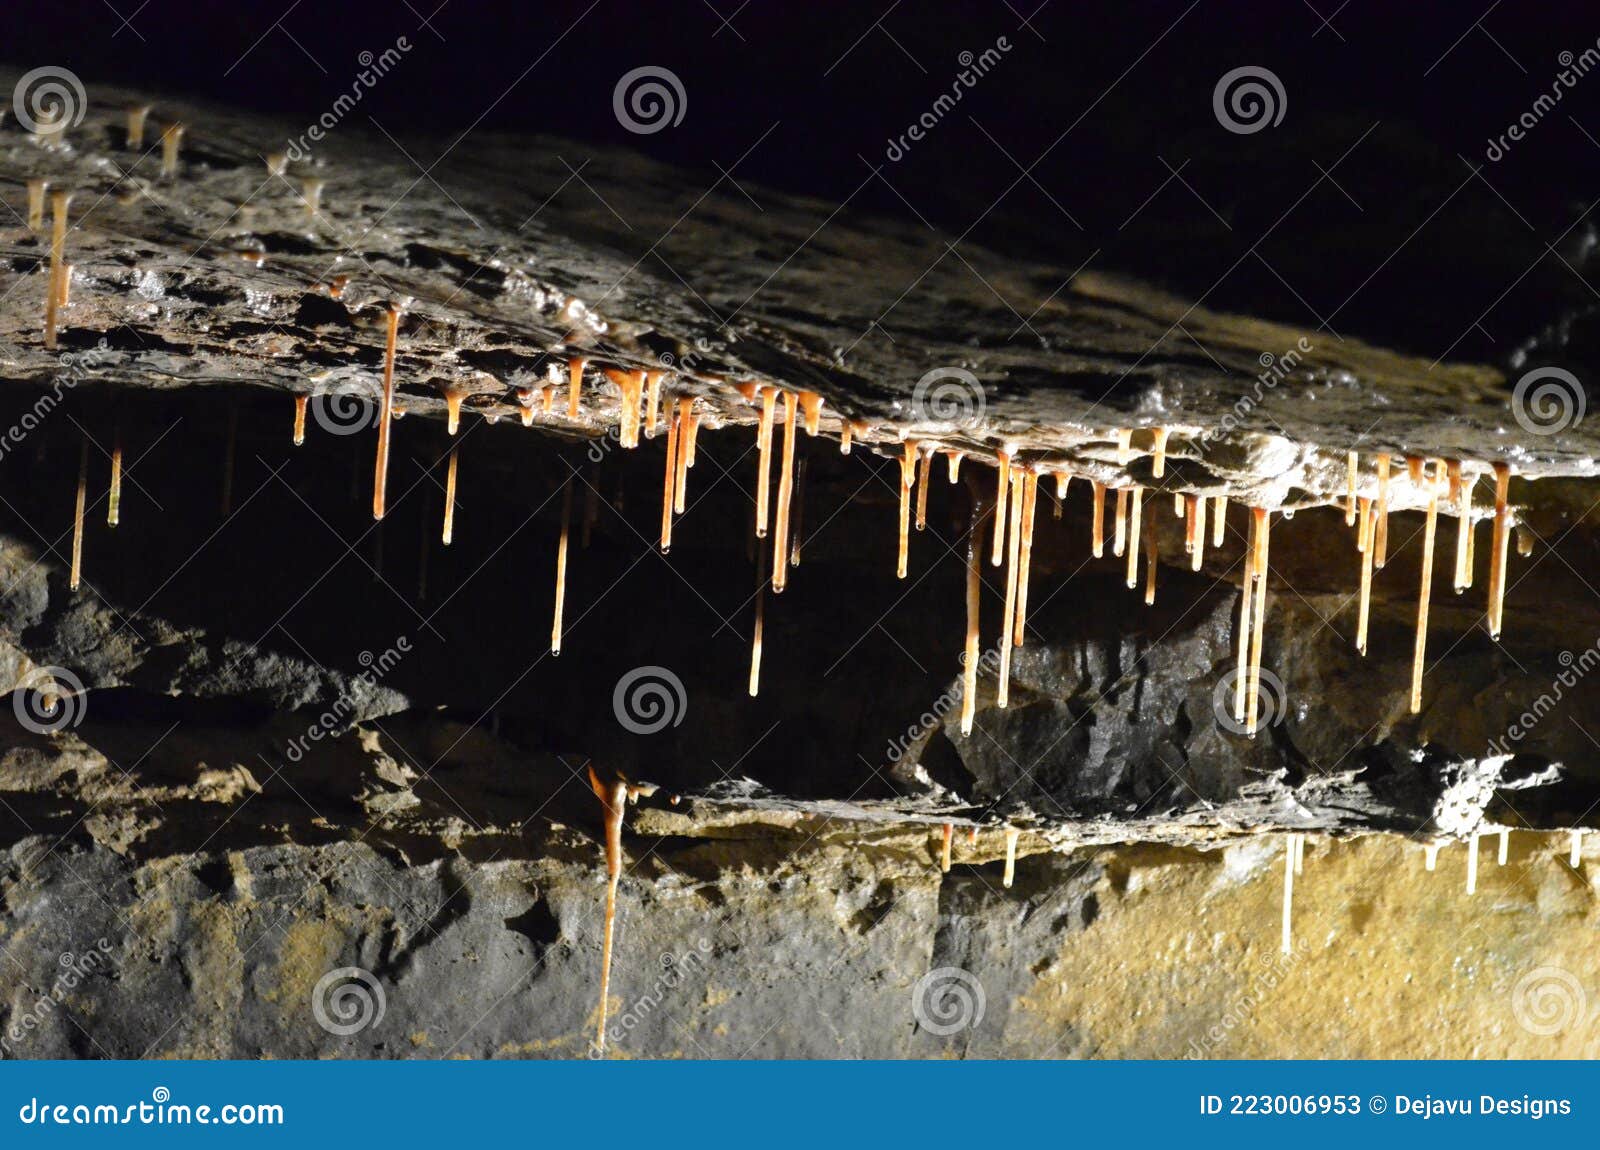 Dripping Stalagmytes in Aillwee Caves in Ireland Stock Image - Image of ...